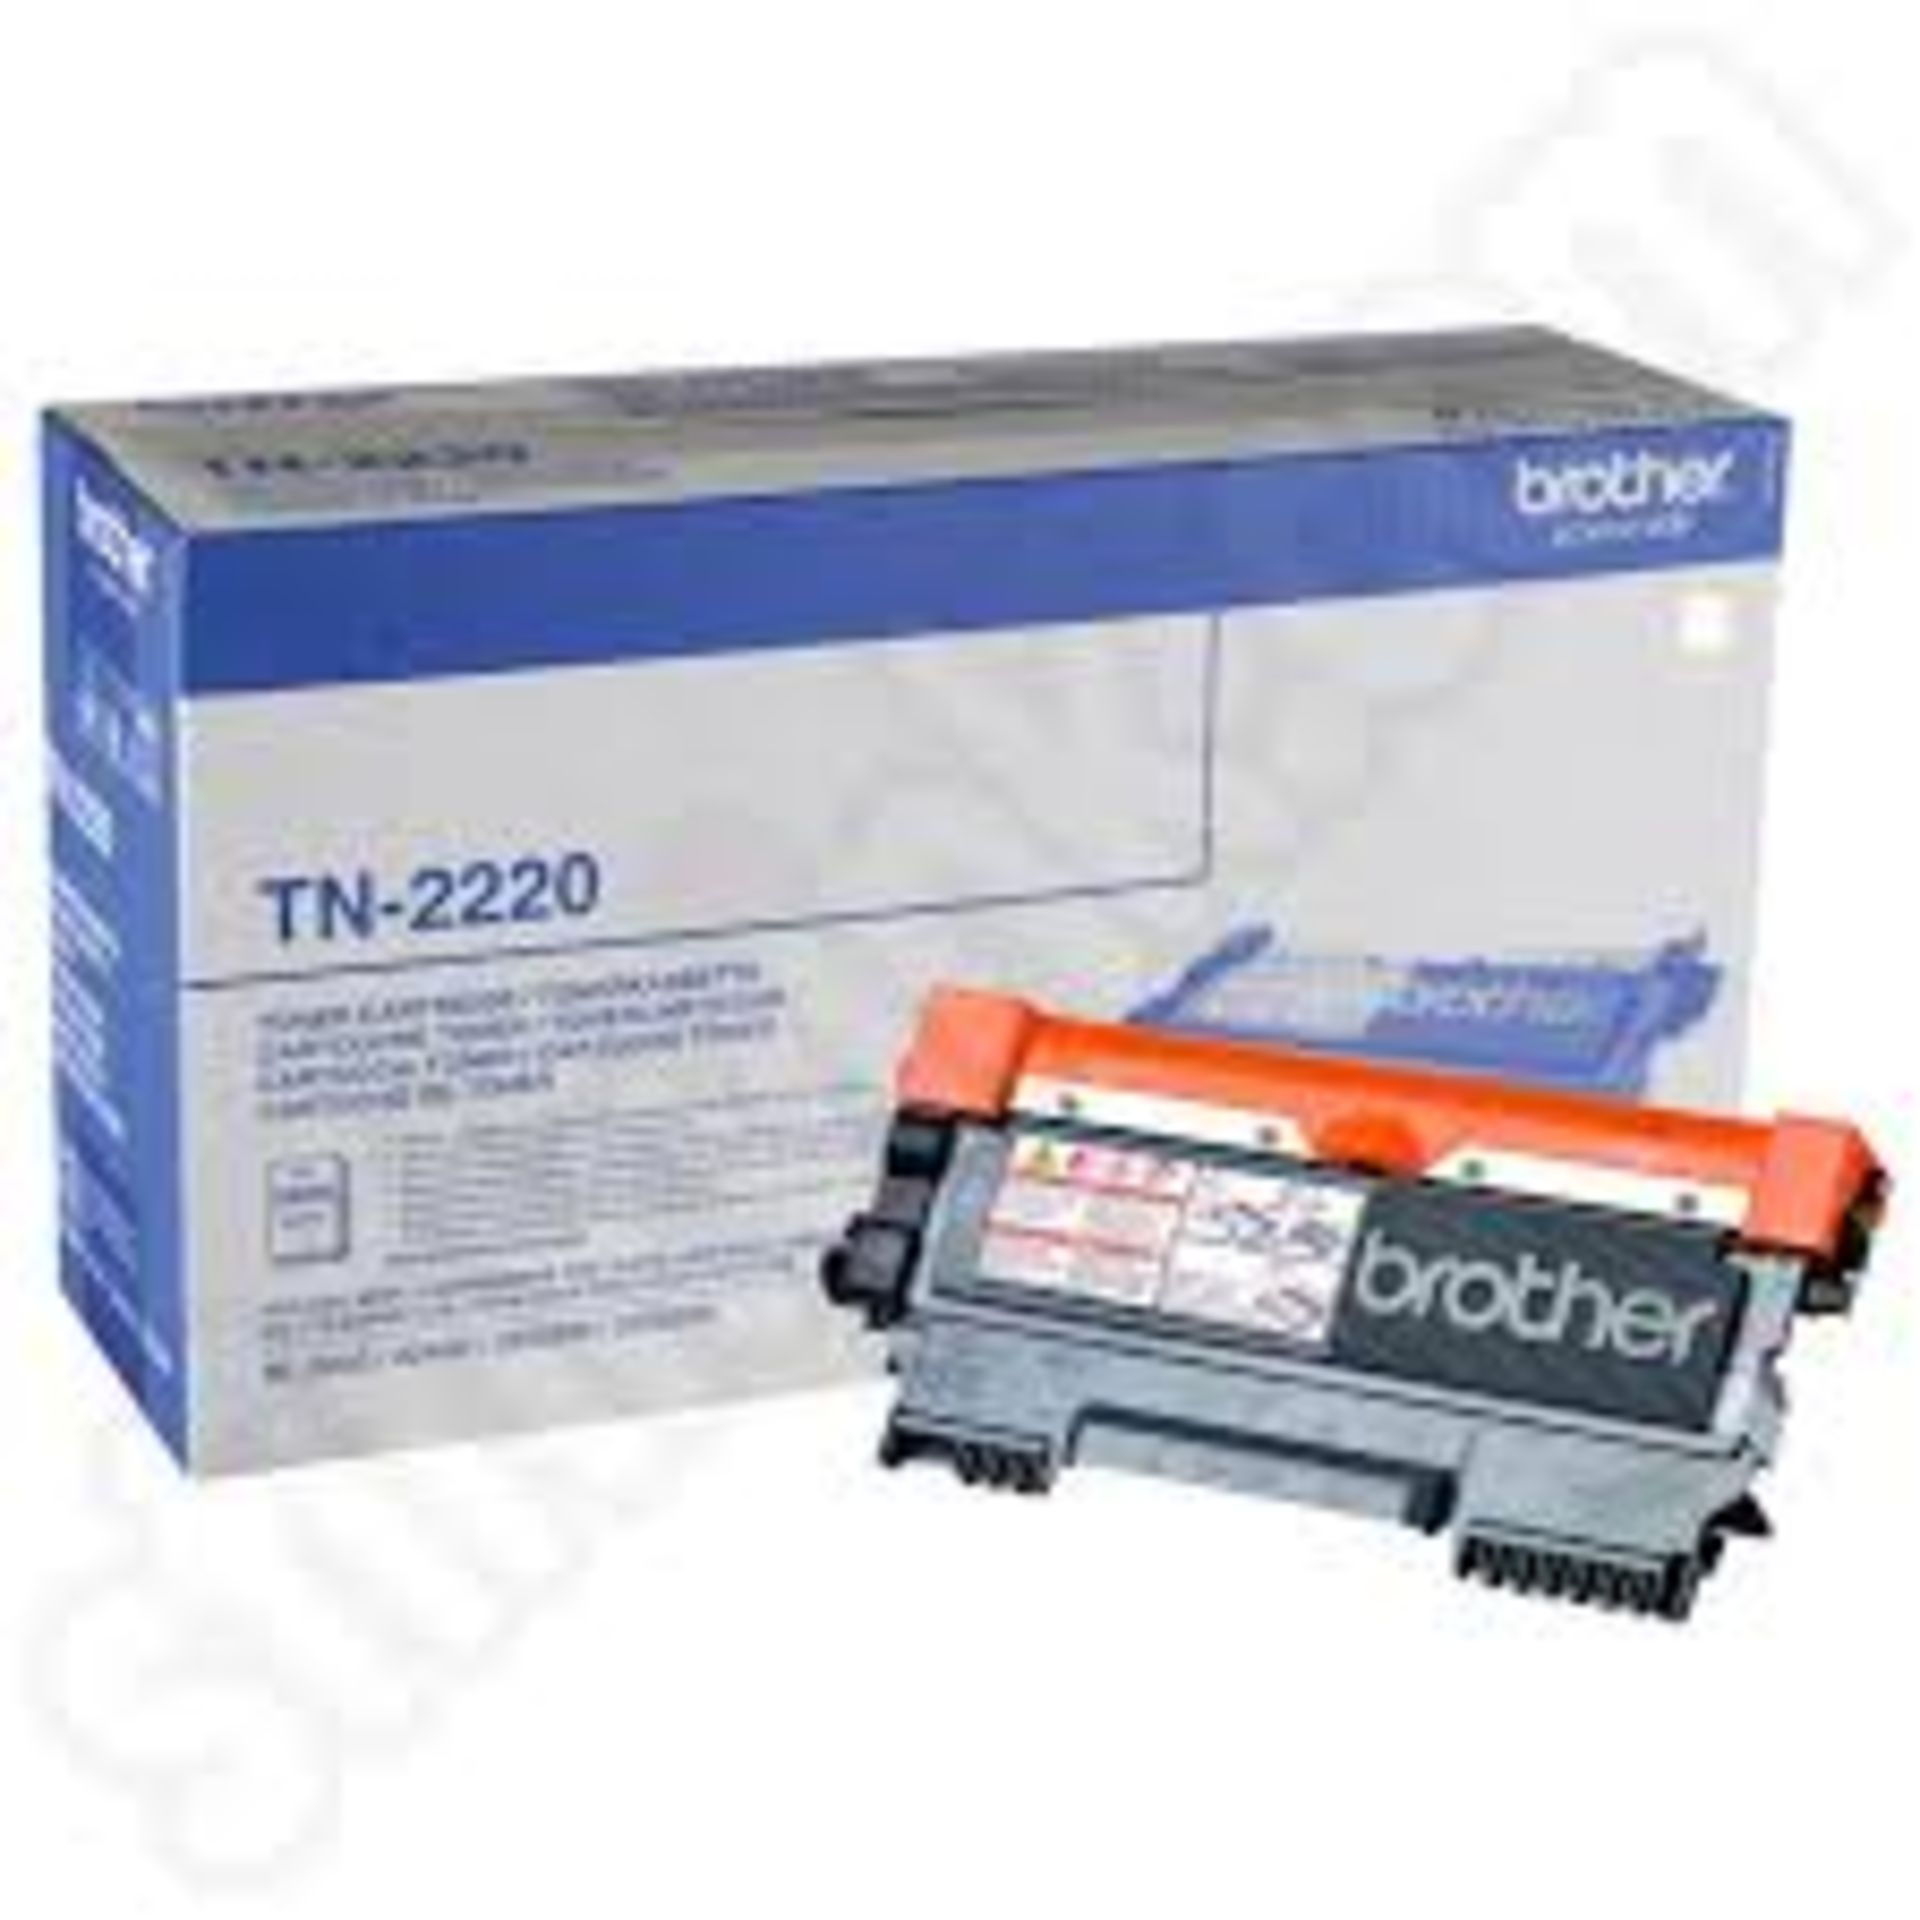 OVER 16000 BRAND NEW PRINTER CARTRIDGES/TONERS COMPATIBLE WITH BROTHER, EPSON, HP, CANON ETC. OVER 3 - Image 10 of 10